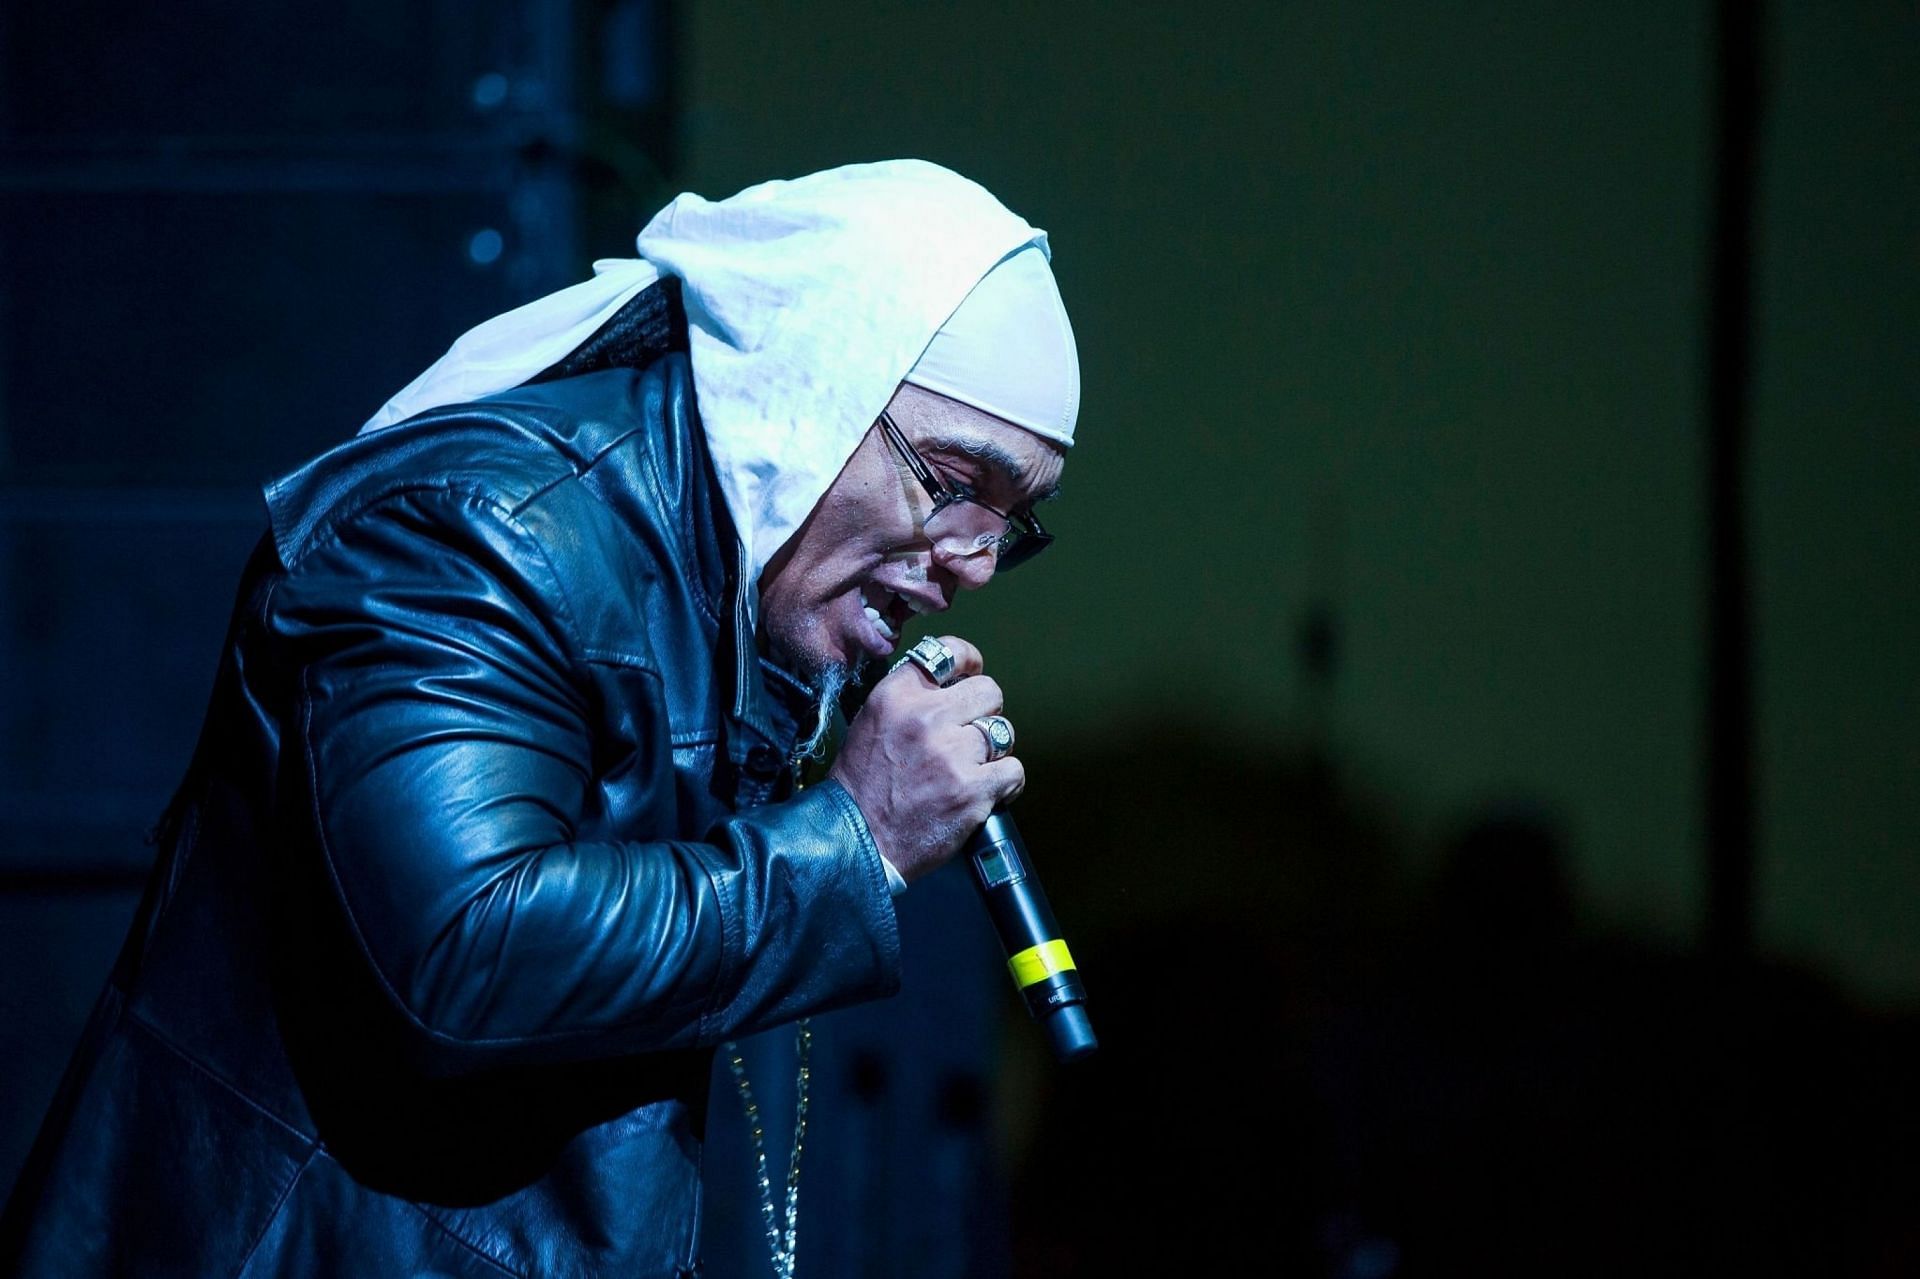 Melle Mel at the Rap Festival in 2016 (Image via Getty Images)